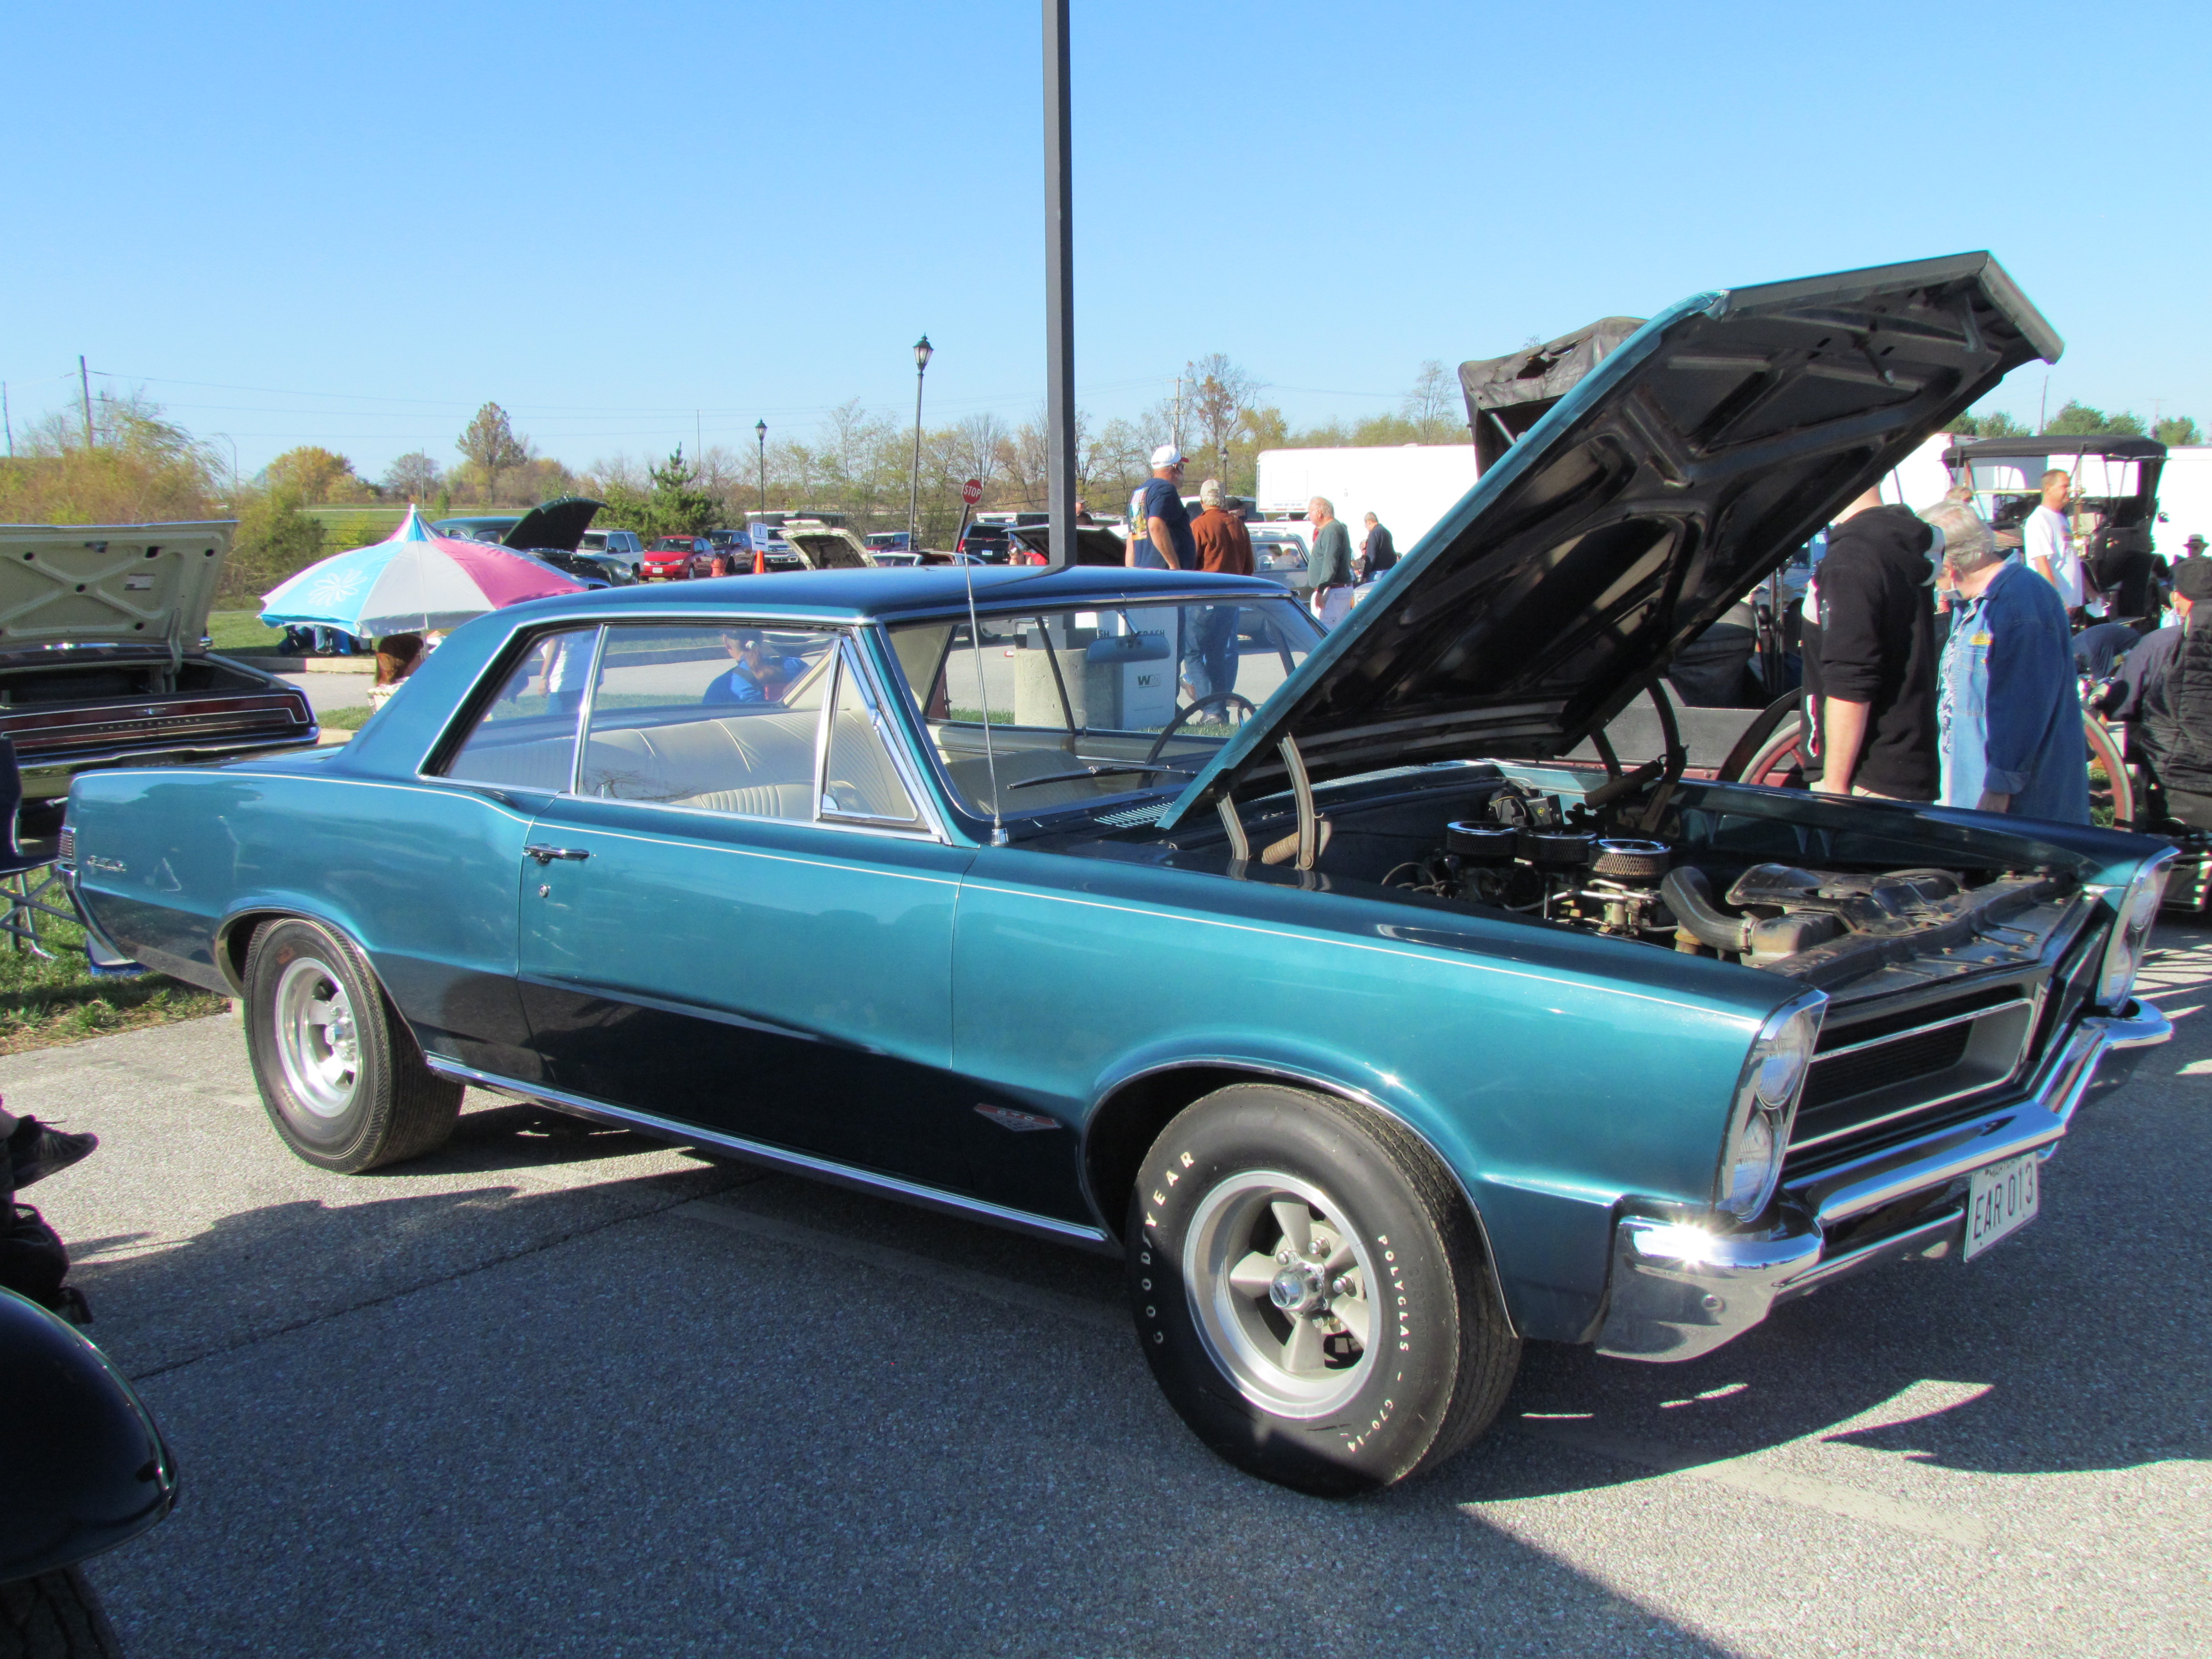 2020 AACA Fall Meet Photo Coverage: Muscle Cars Came In Droves To Pennsylvania – Awesome Iron!